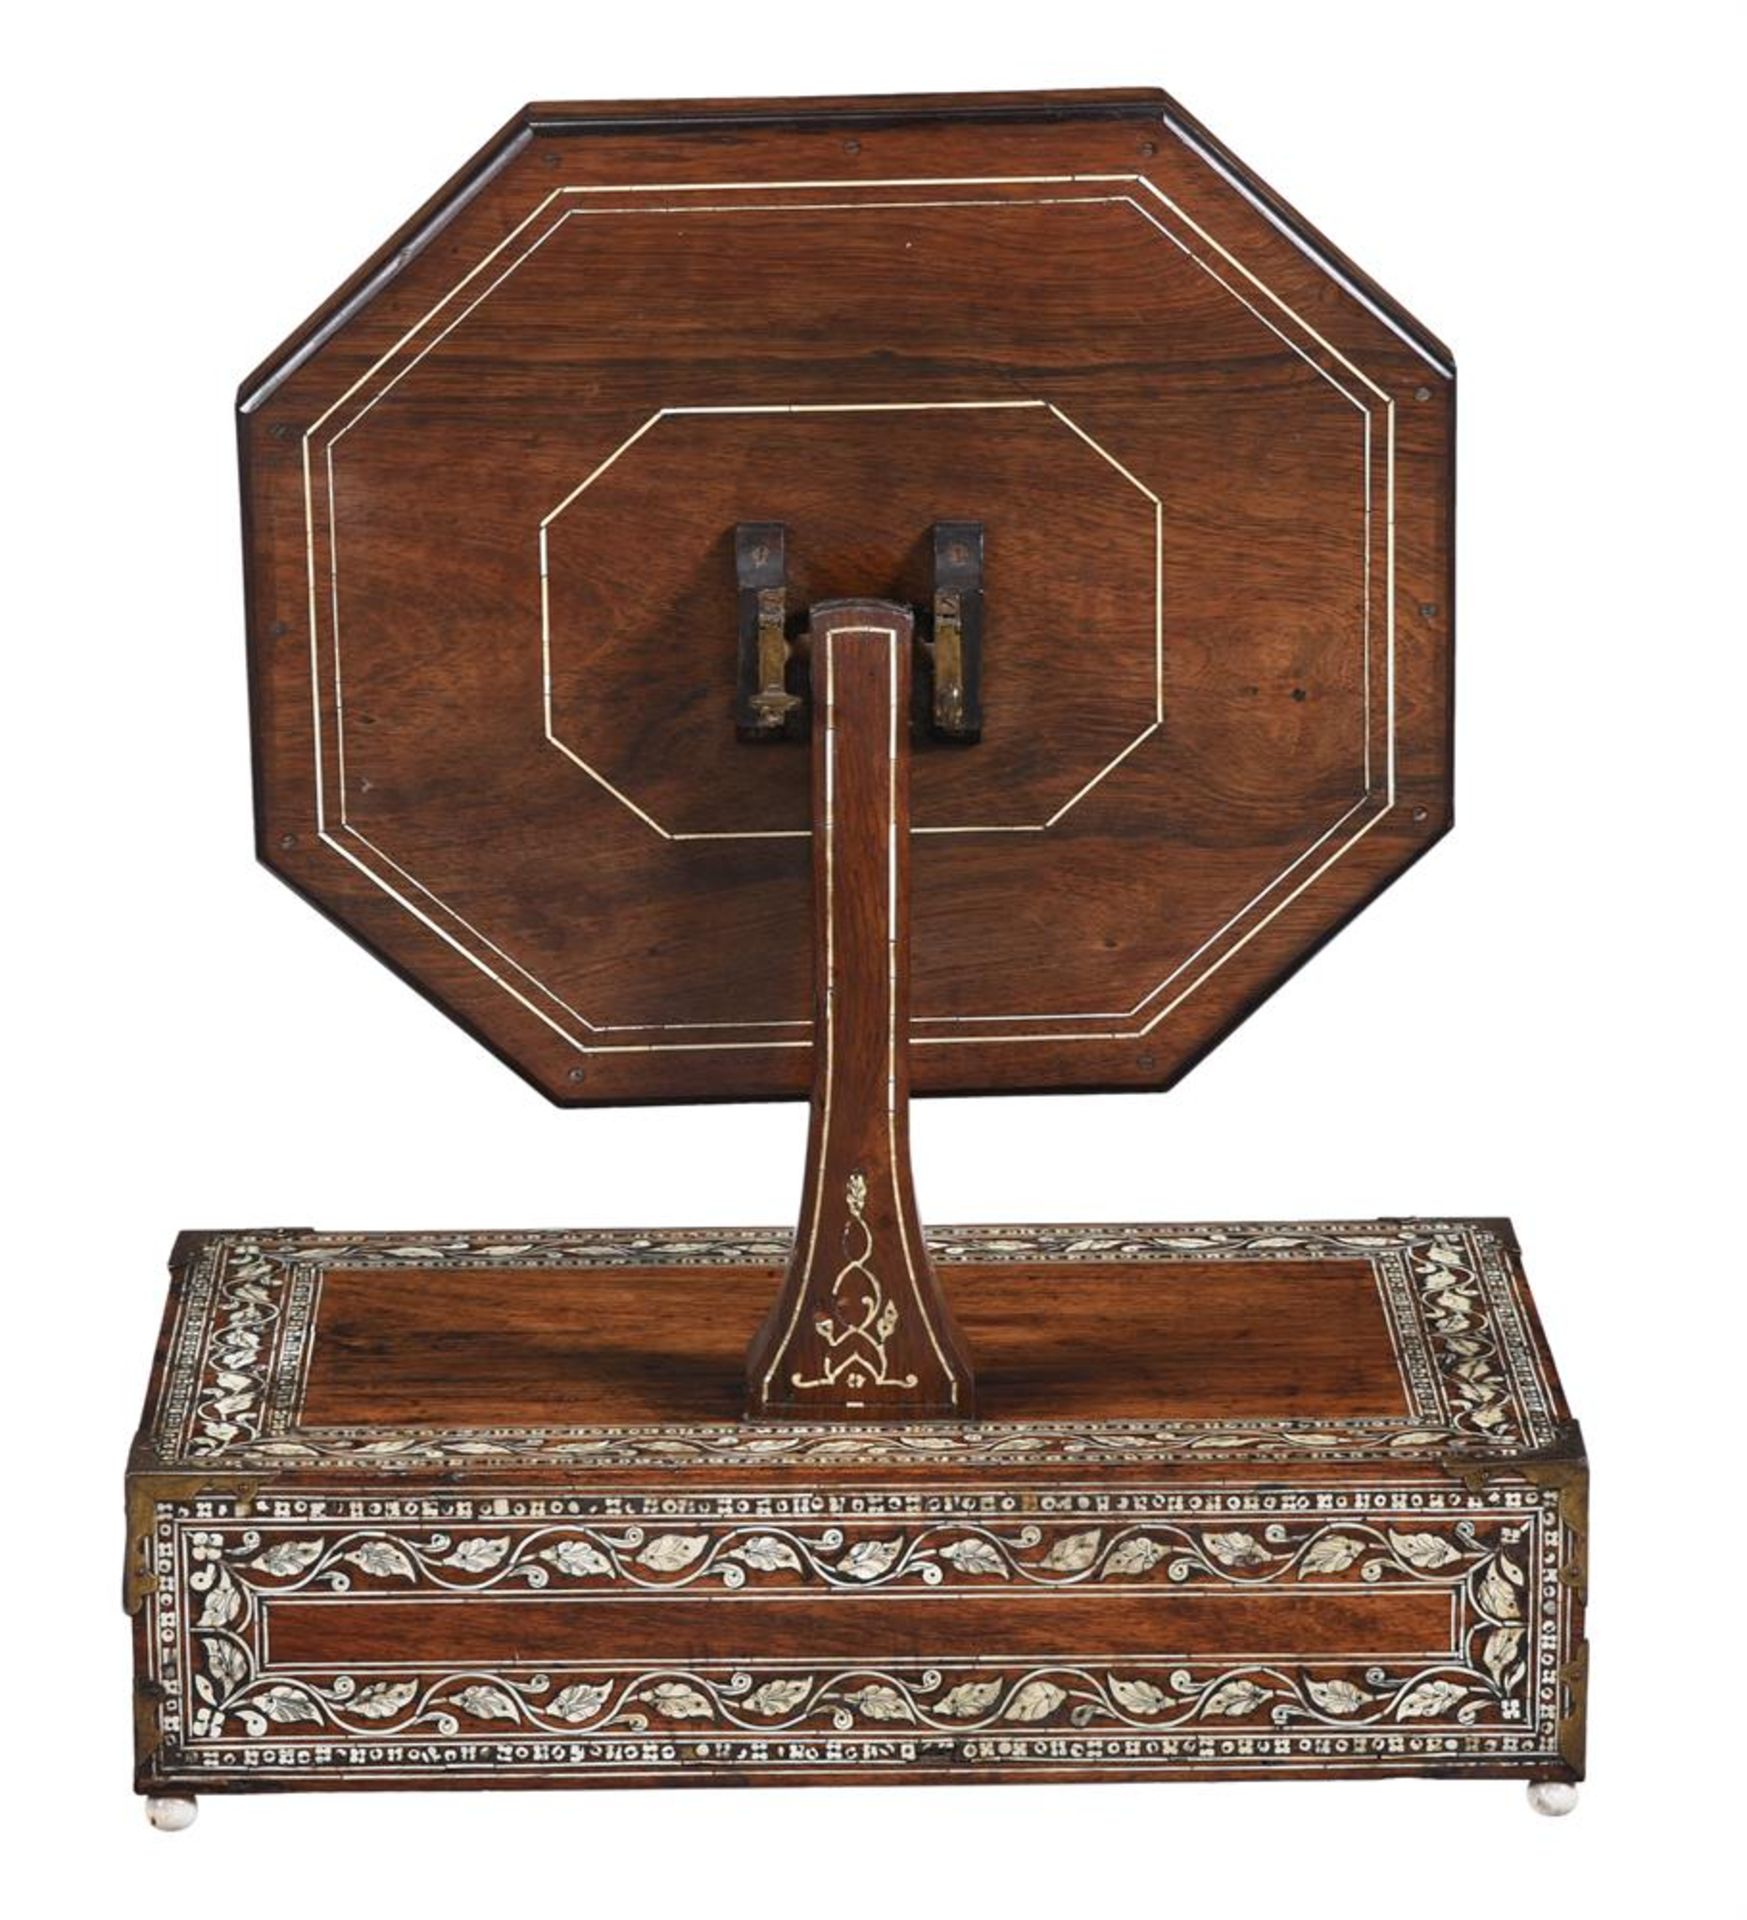 Y AN ANGLO-INDIAN ROSEWOOD, IVORY AND BONE DRESSING MIRROR, FIRST HALF 19TH CENTURY - Image 5 of 5